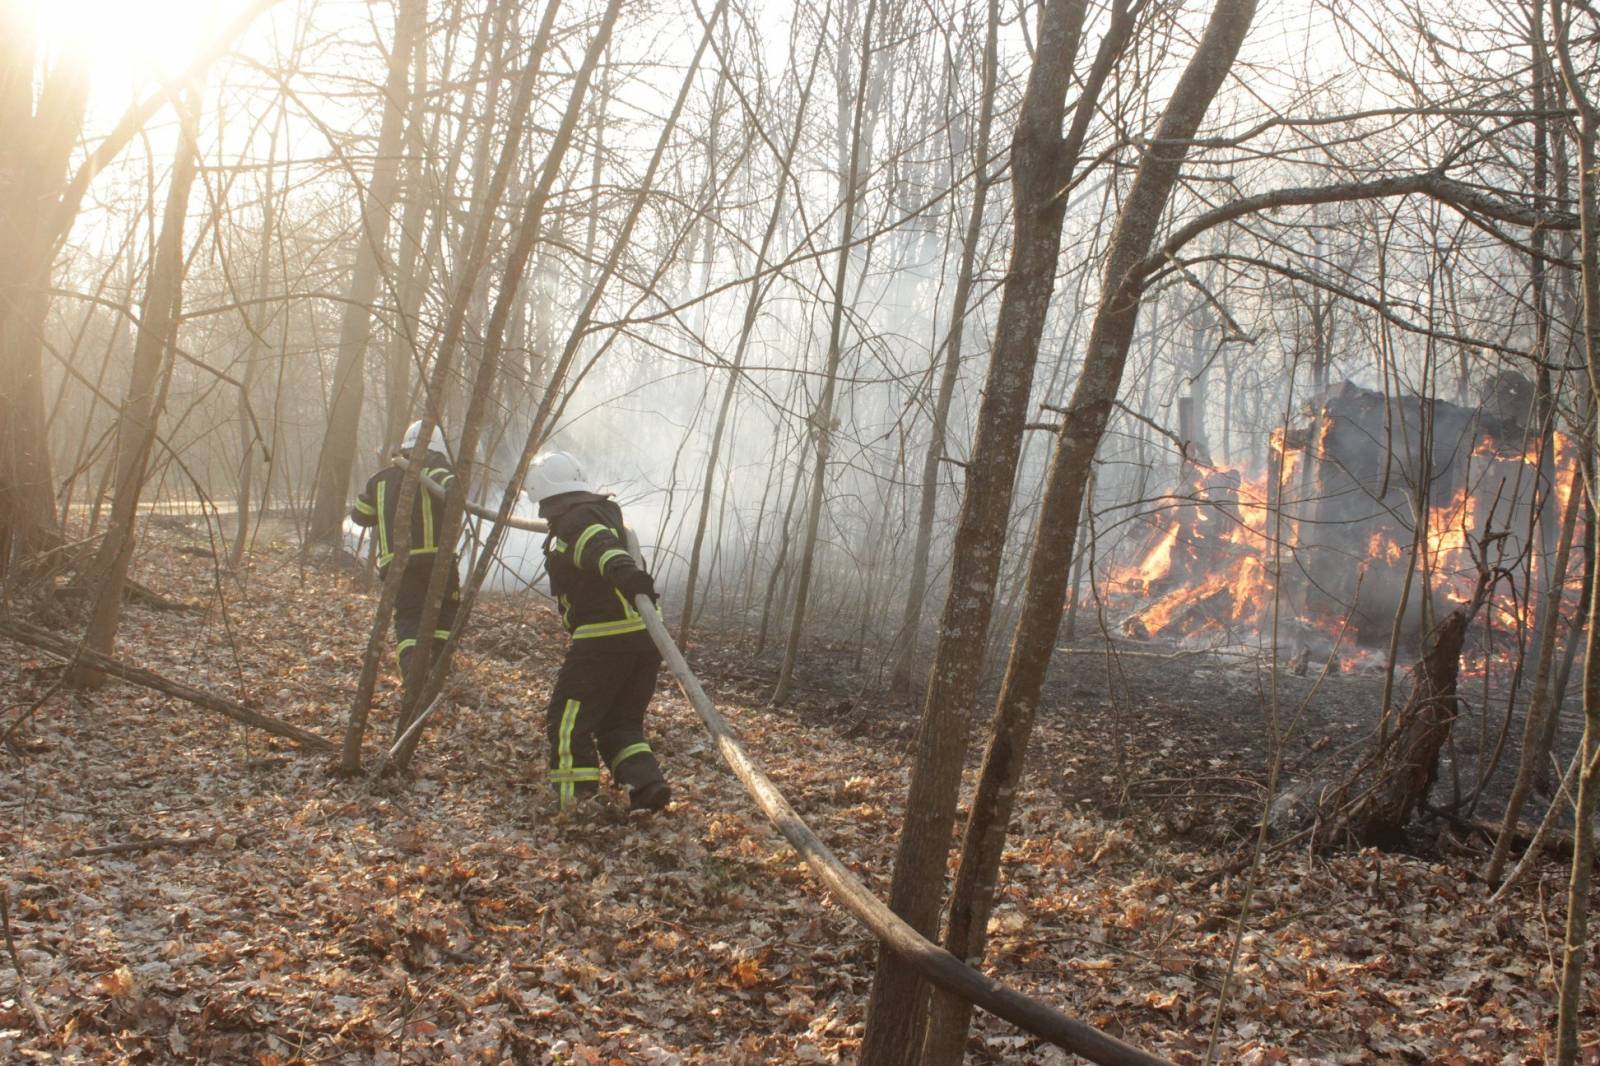 Firefighters try to extinguish a fire burning in the exclusion zone around the Chernobyl nuclear power plant, in Kiev region